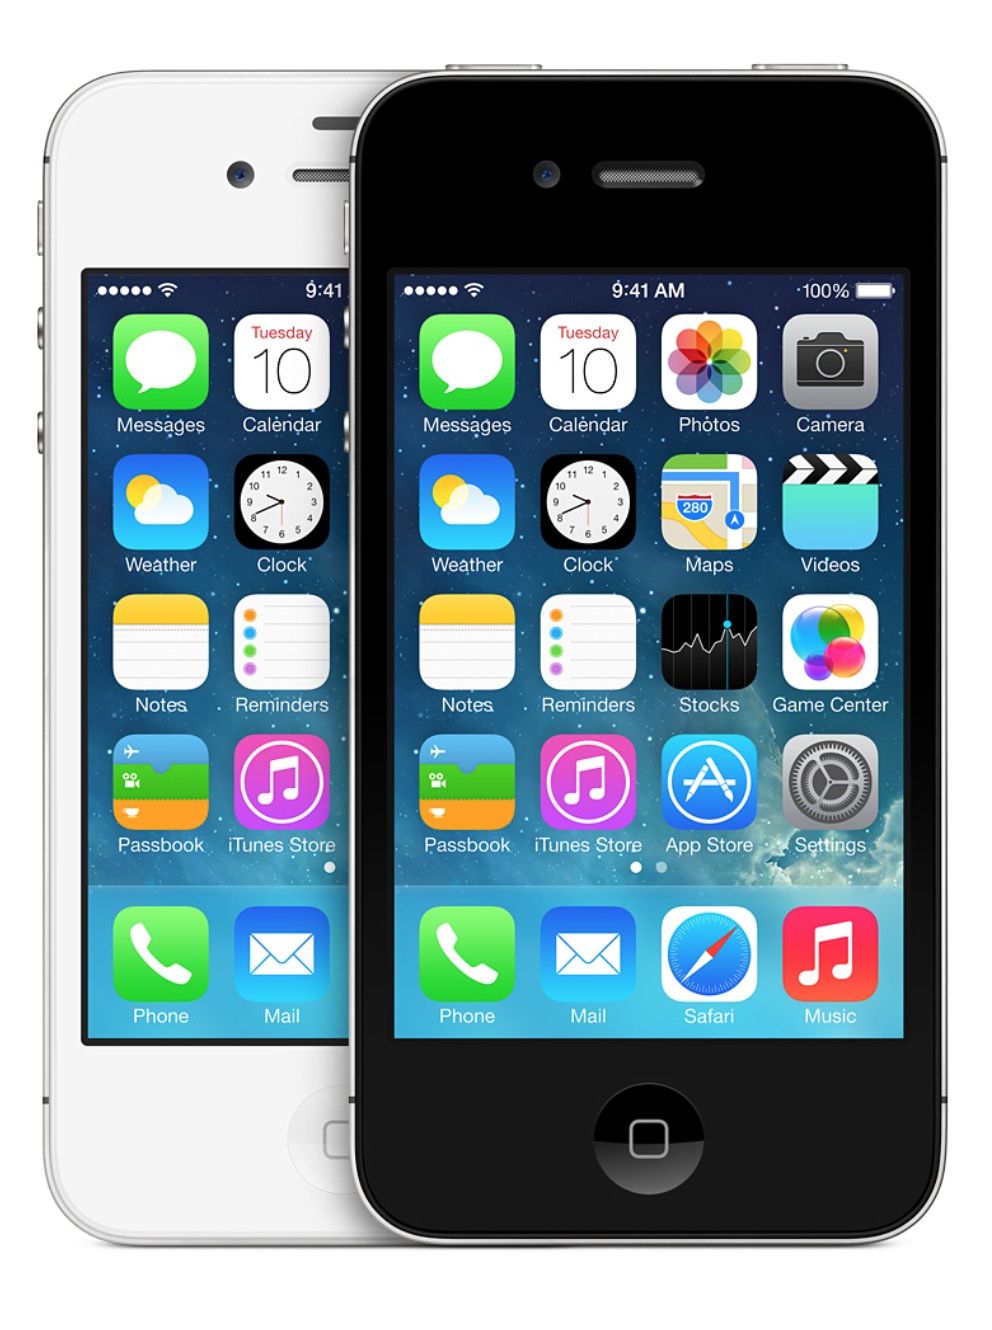 iPhone 4S Hardware and Software Features